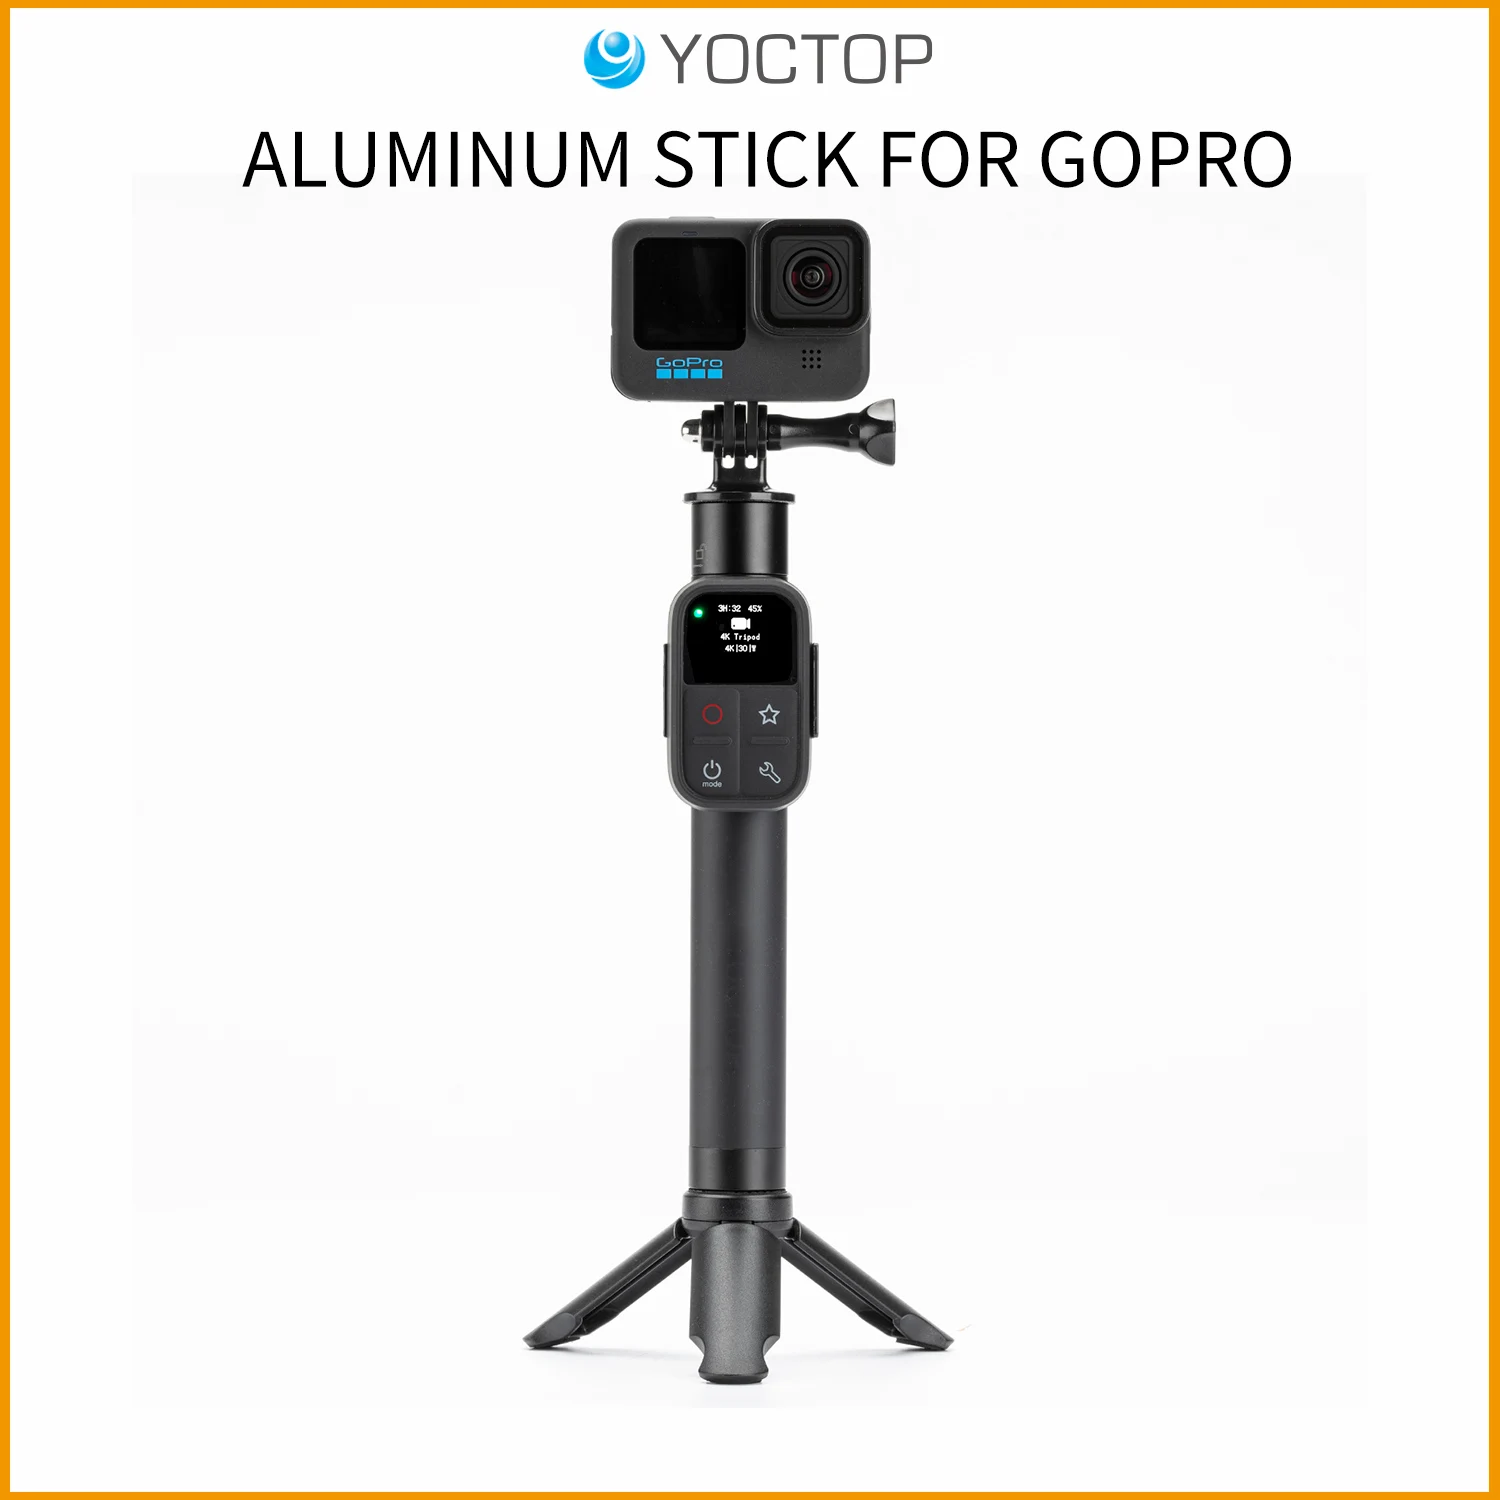 Extending Stick with Remote Housing for GoPro Aluminum alloy High-quality Durable and Portable